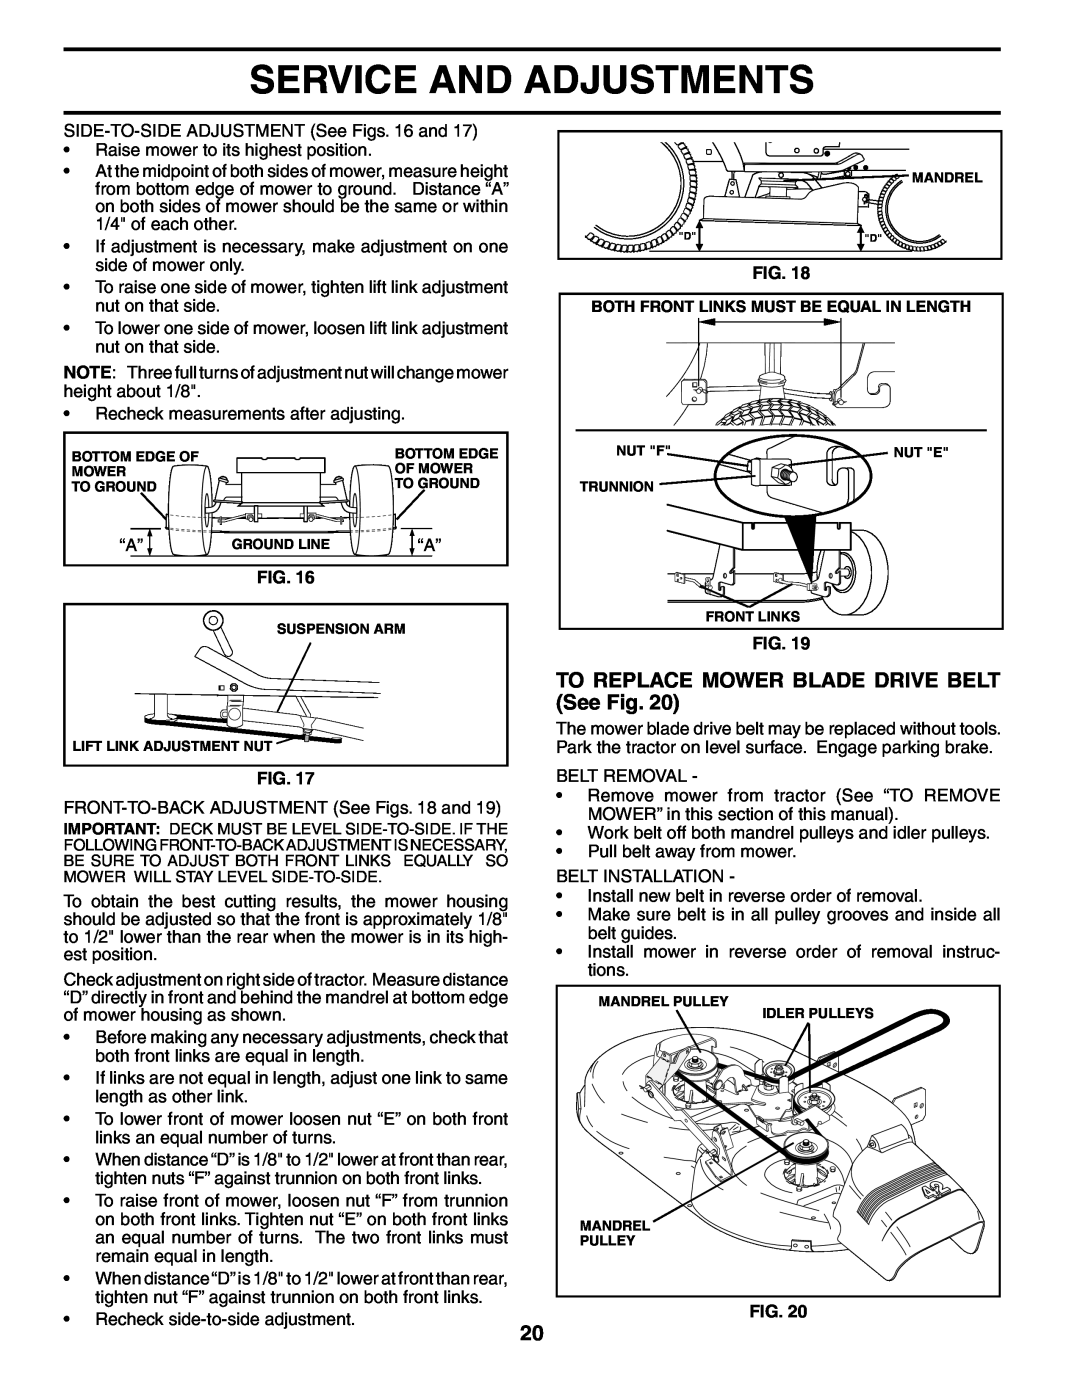 Husqvarna LTH1542 owner manual TO REPLACE MOWER BLADE DRIVE BELT See Fig, Service And Adjustments 